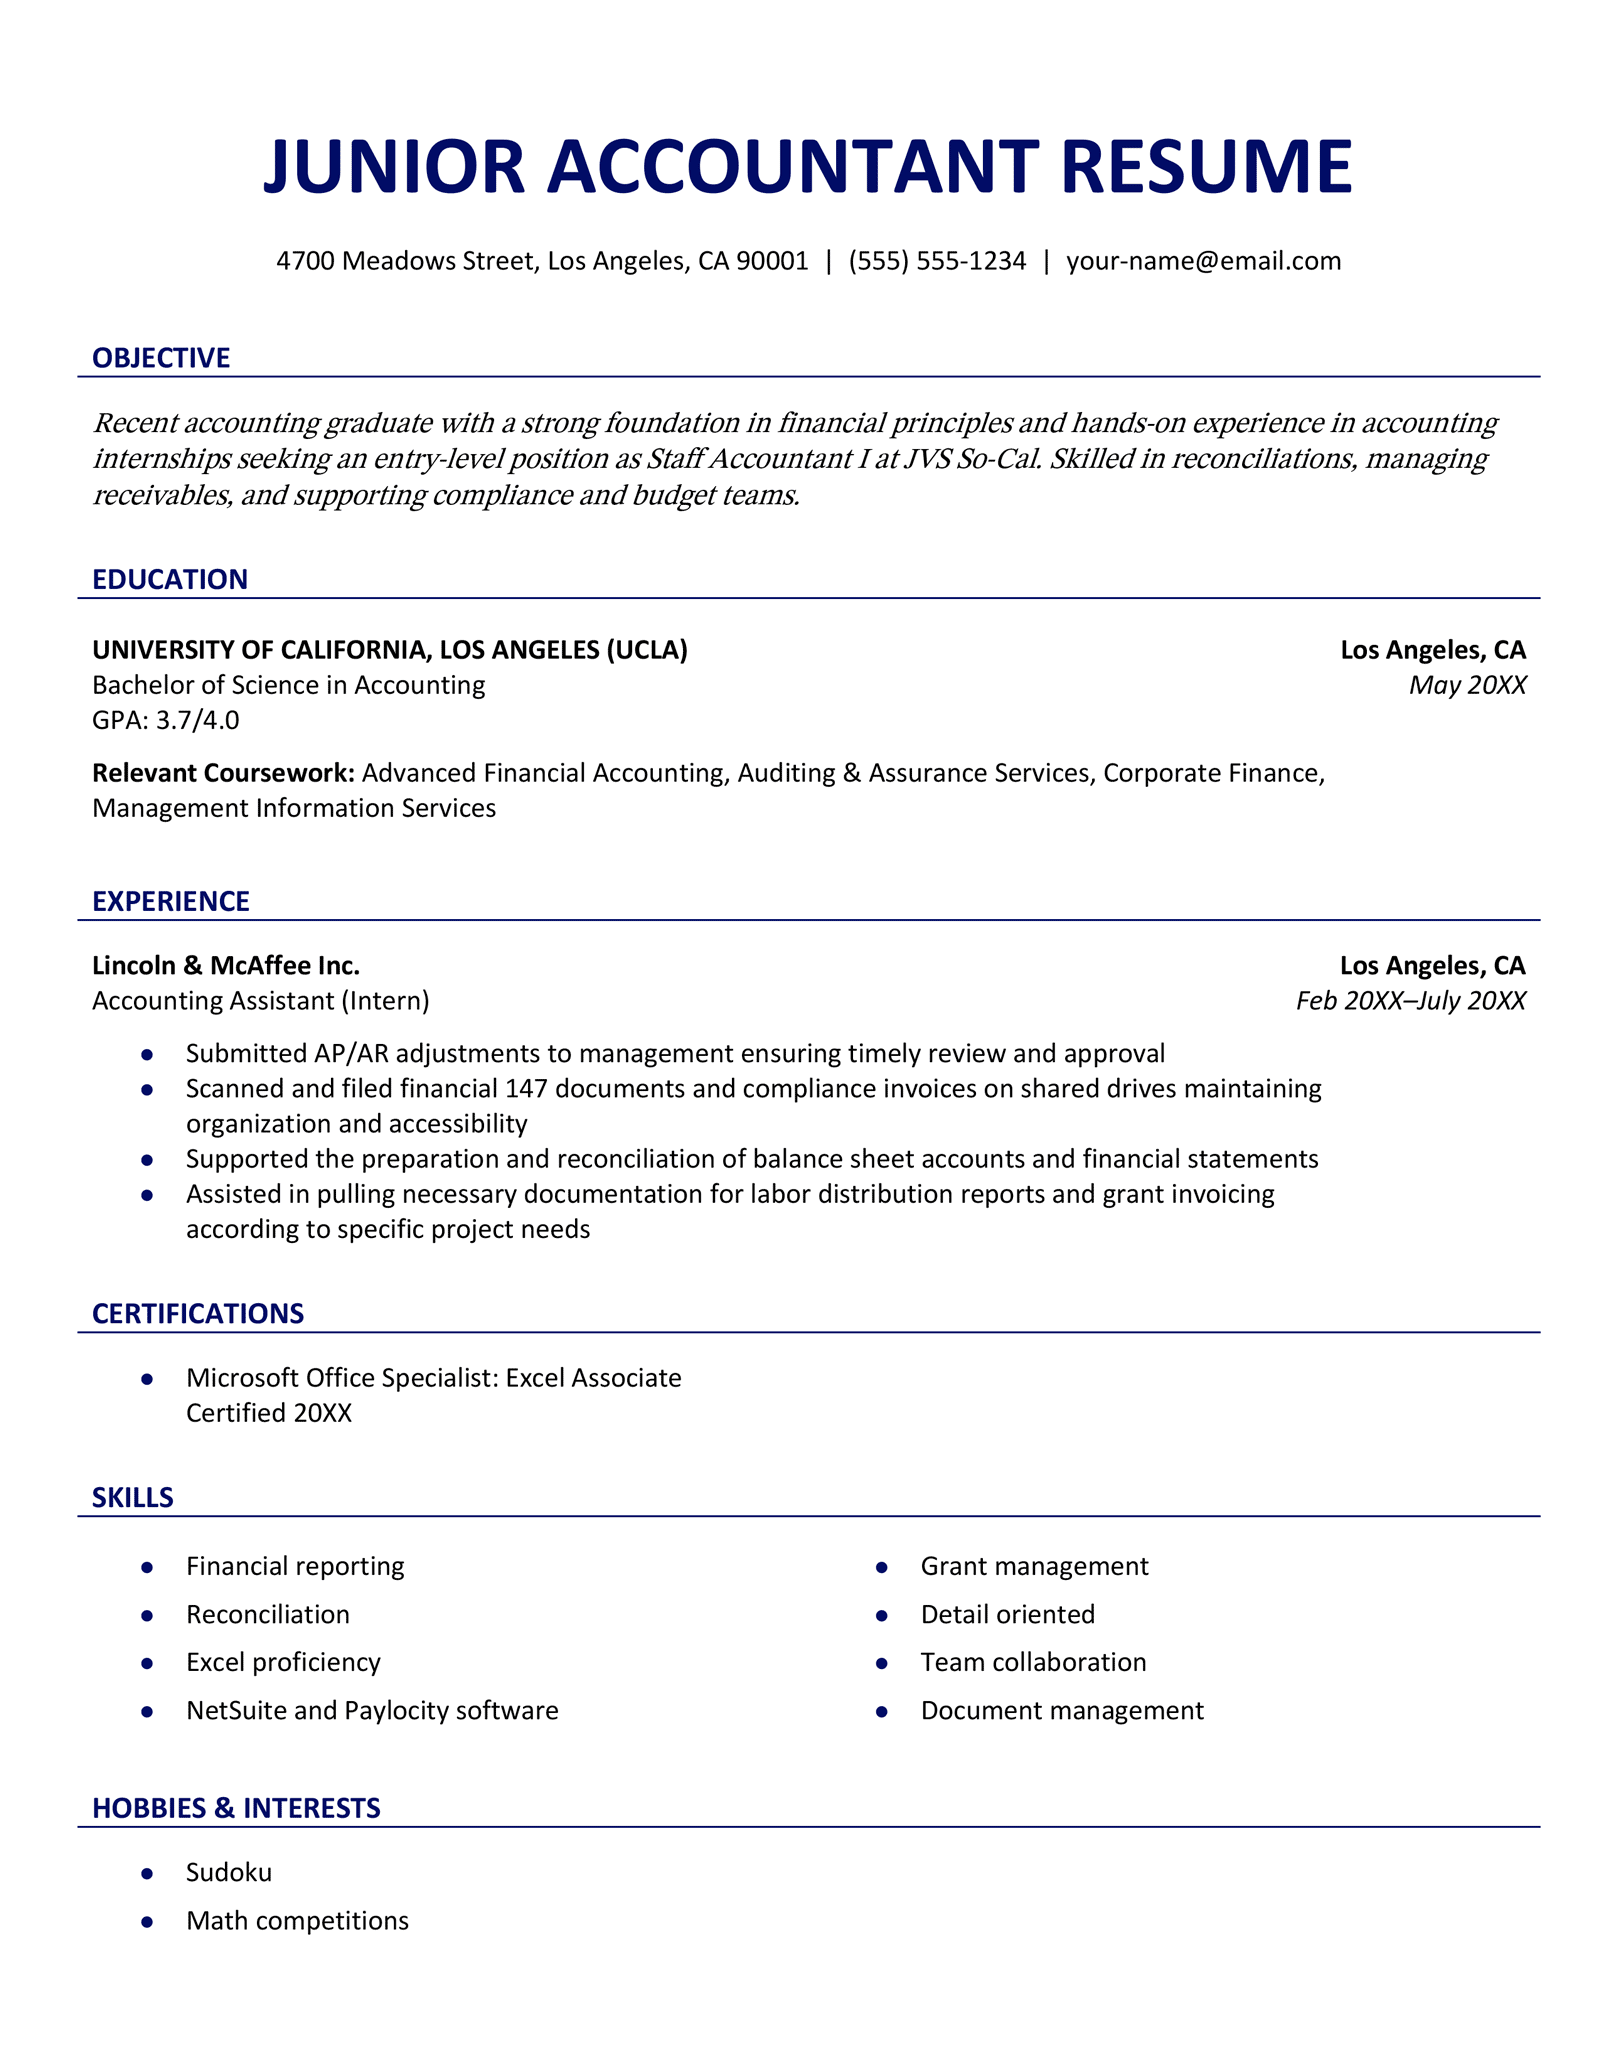 A junior accountant resume example for someone seeking an entry-level role in the accountancy field.